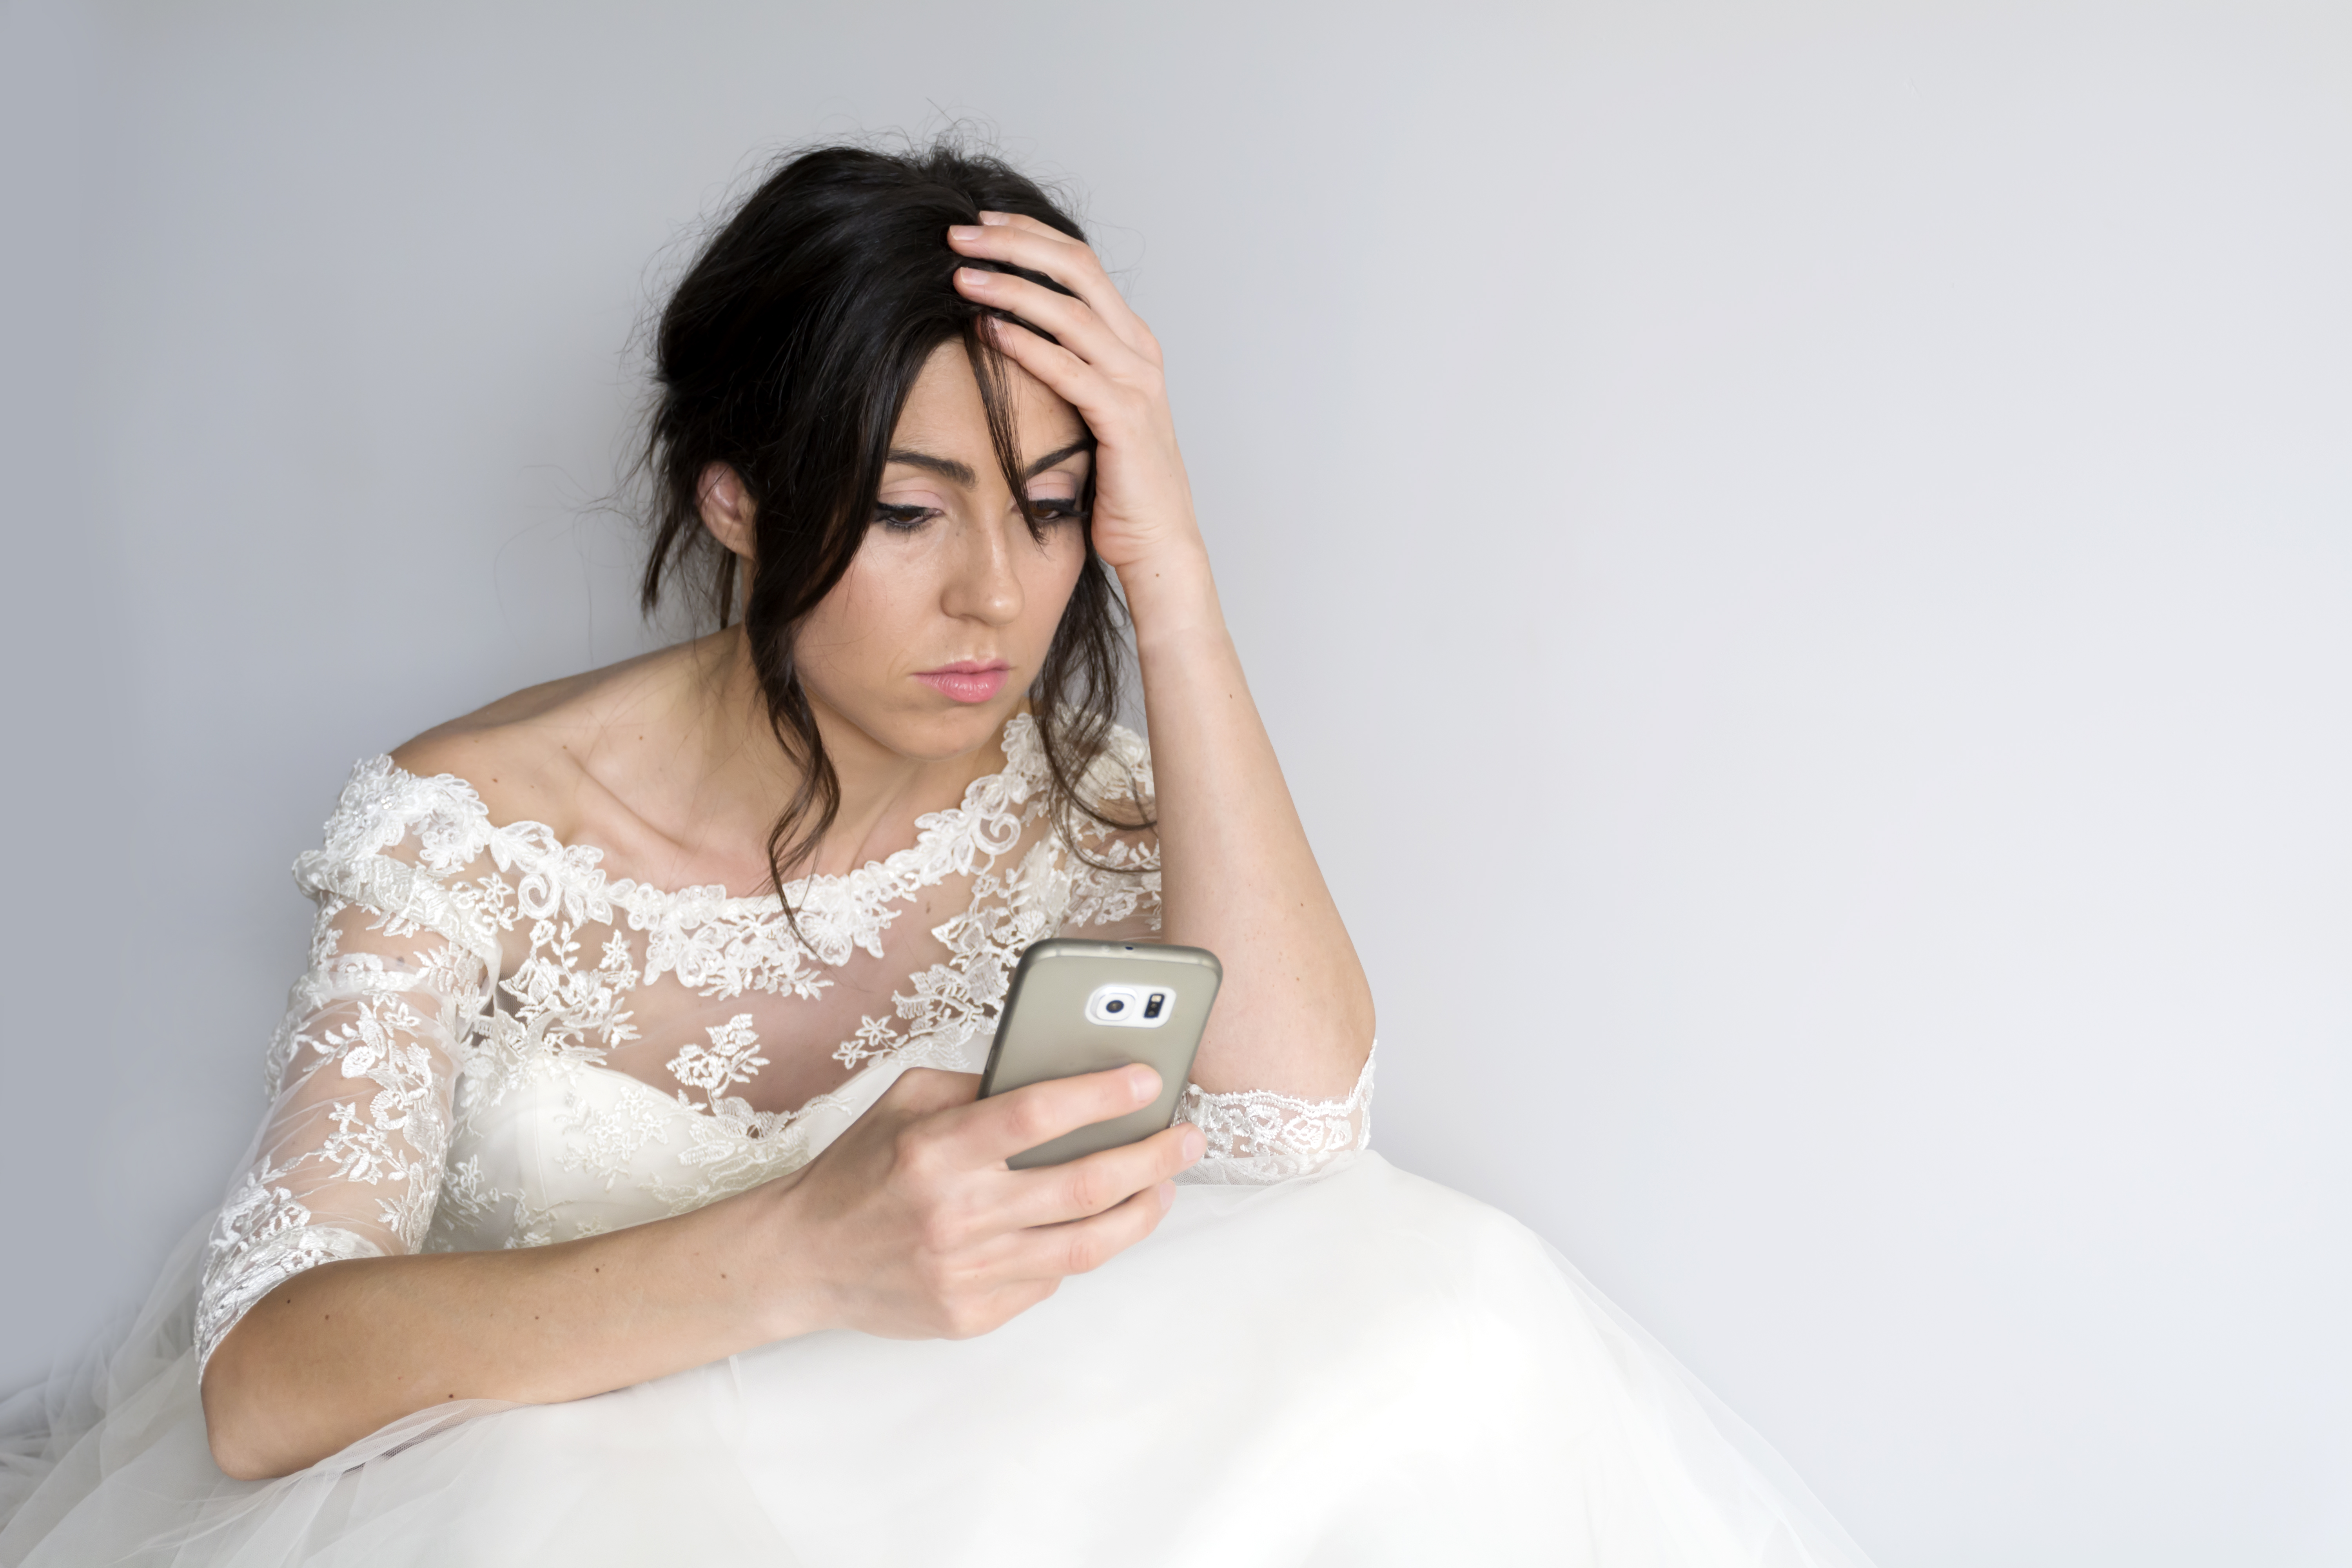 Sad bride looking at her phone | Source: Getty Images